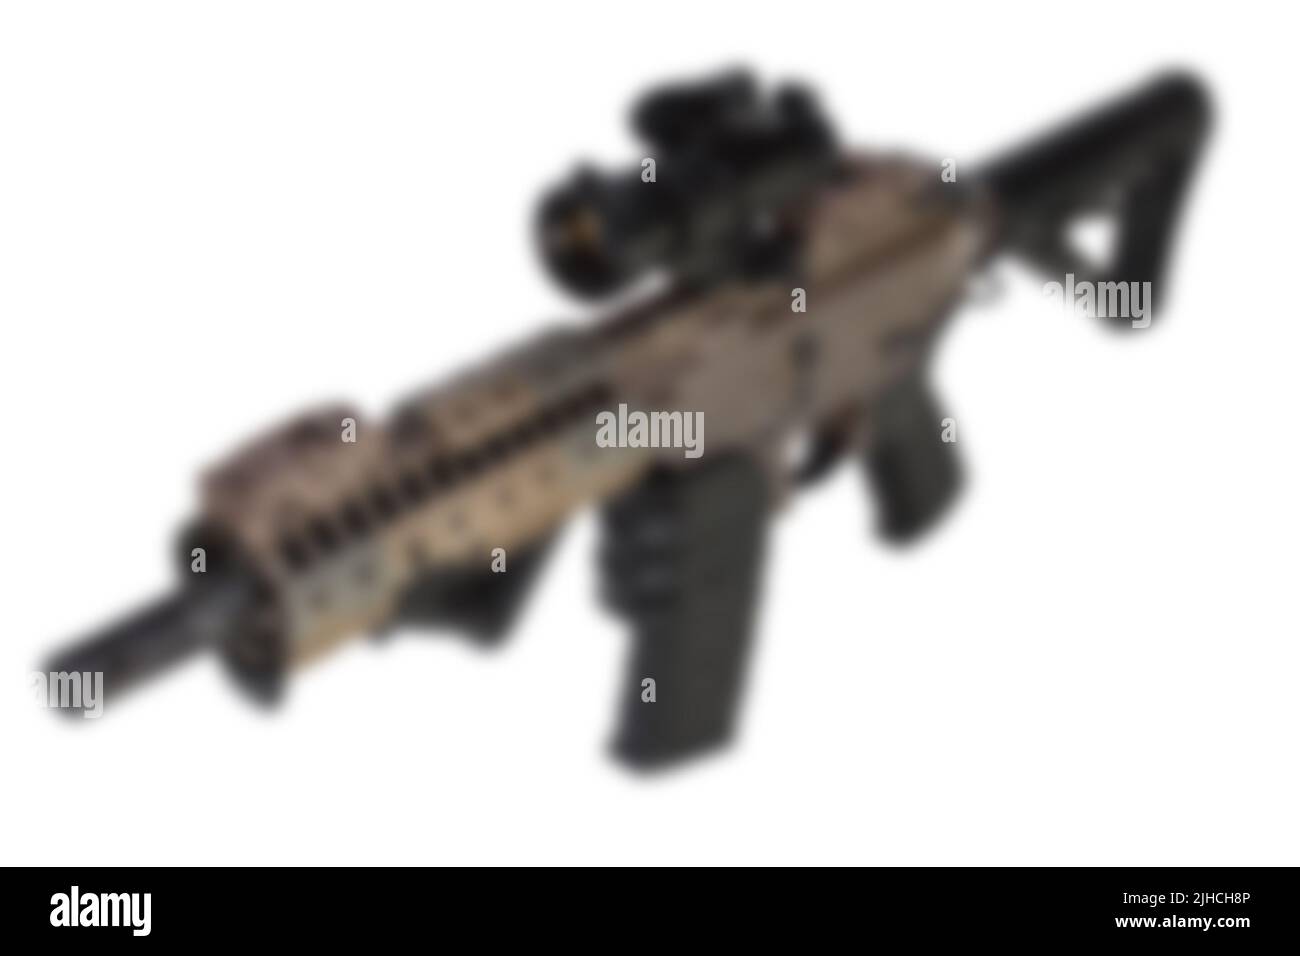 The variocolored blurred image special forces rifle Stock Photo